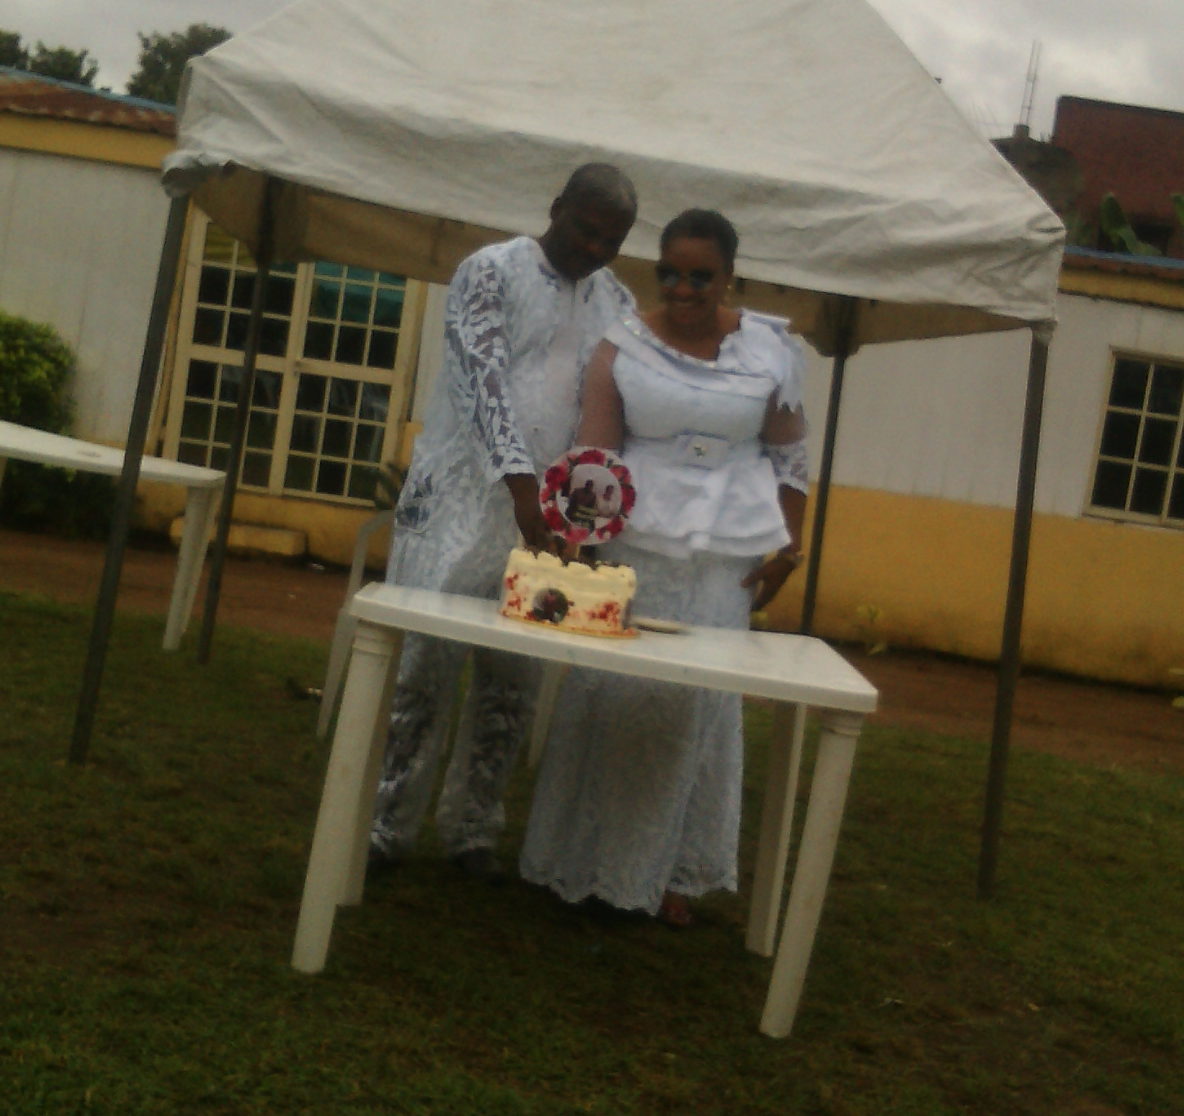 Pastor Olusegun Taiwo has dumped his wife after secretly marrying another woman